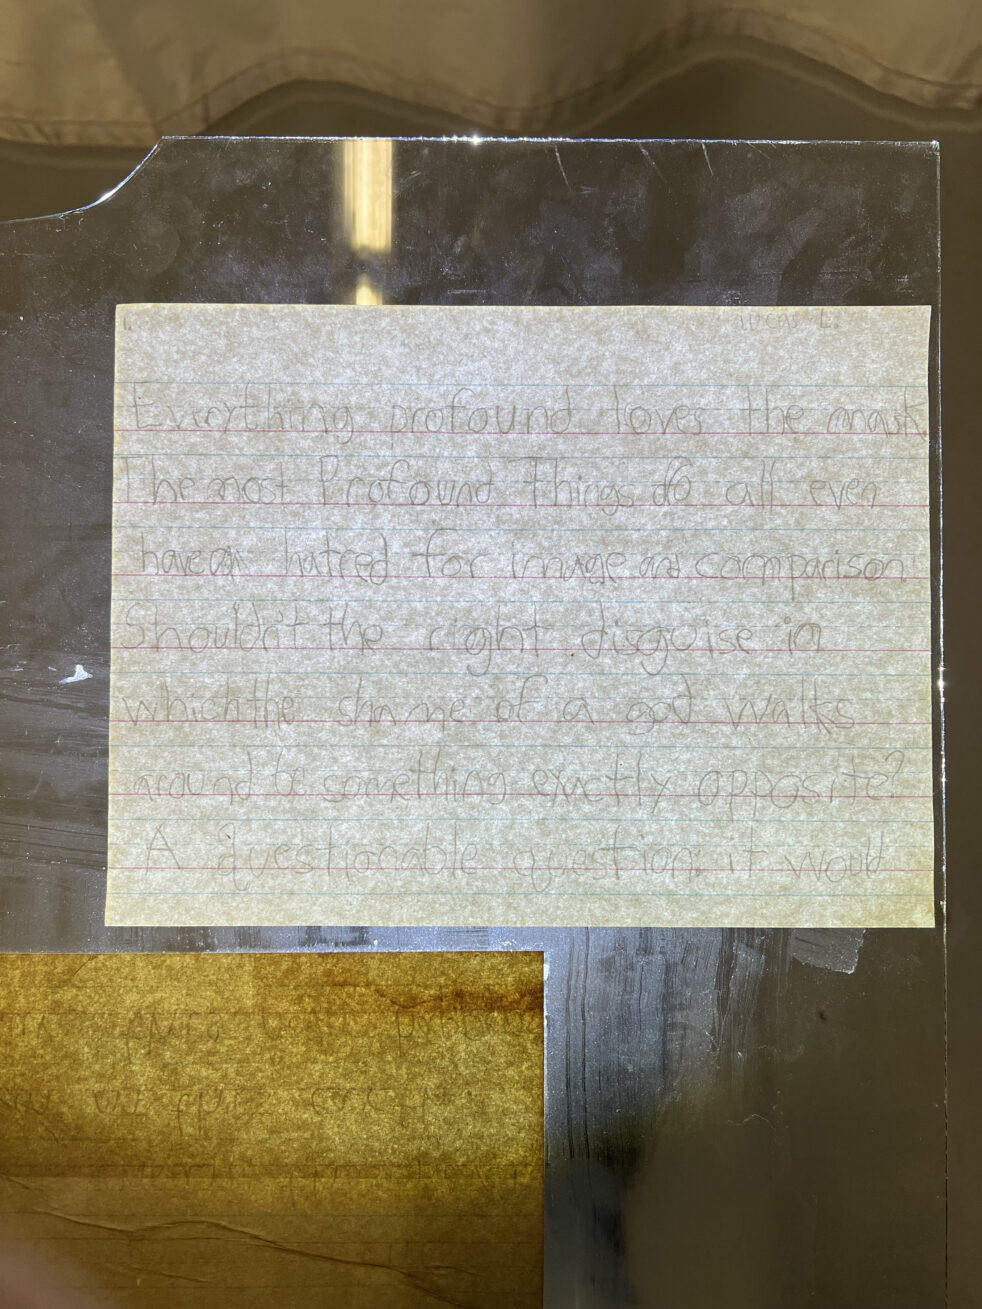 Note on glass